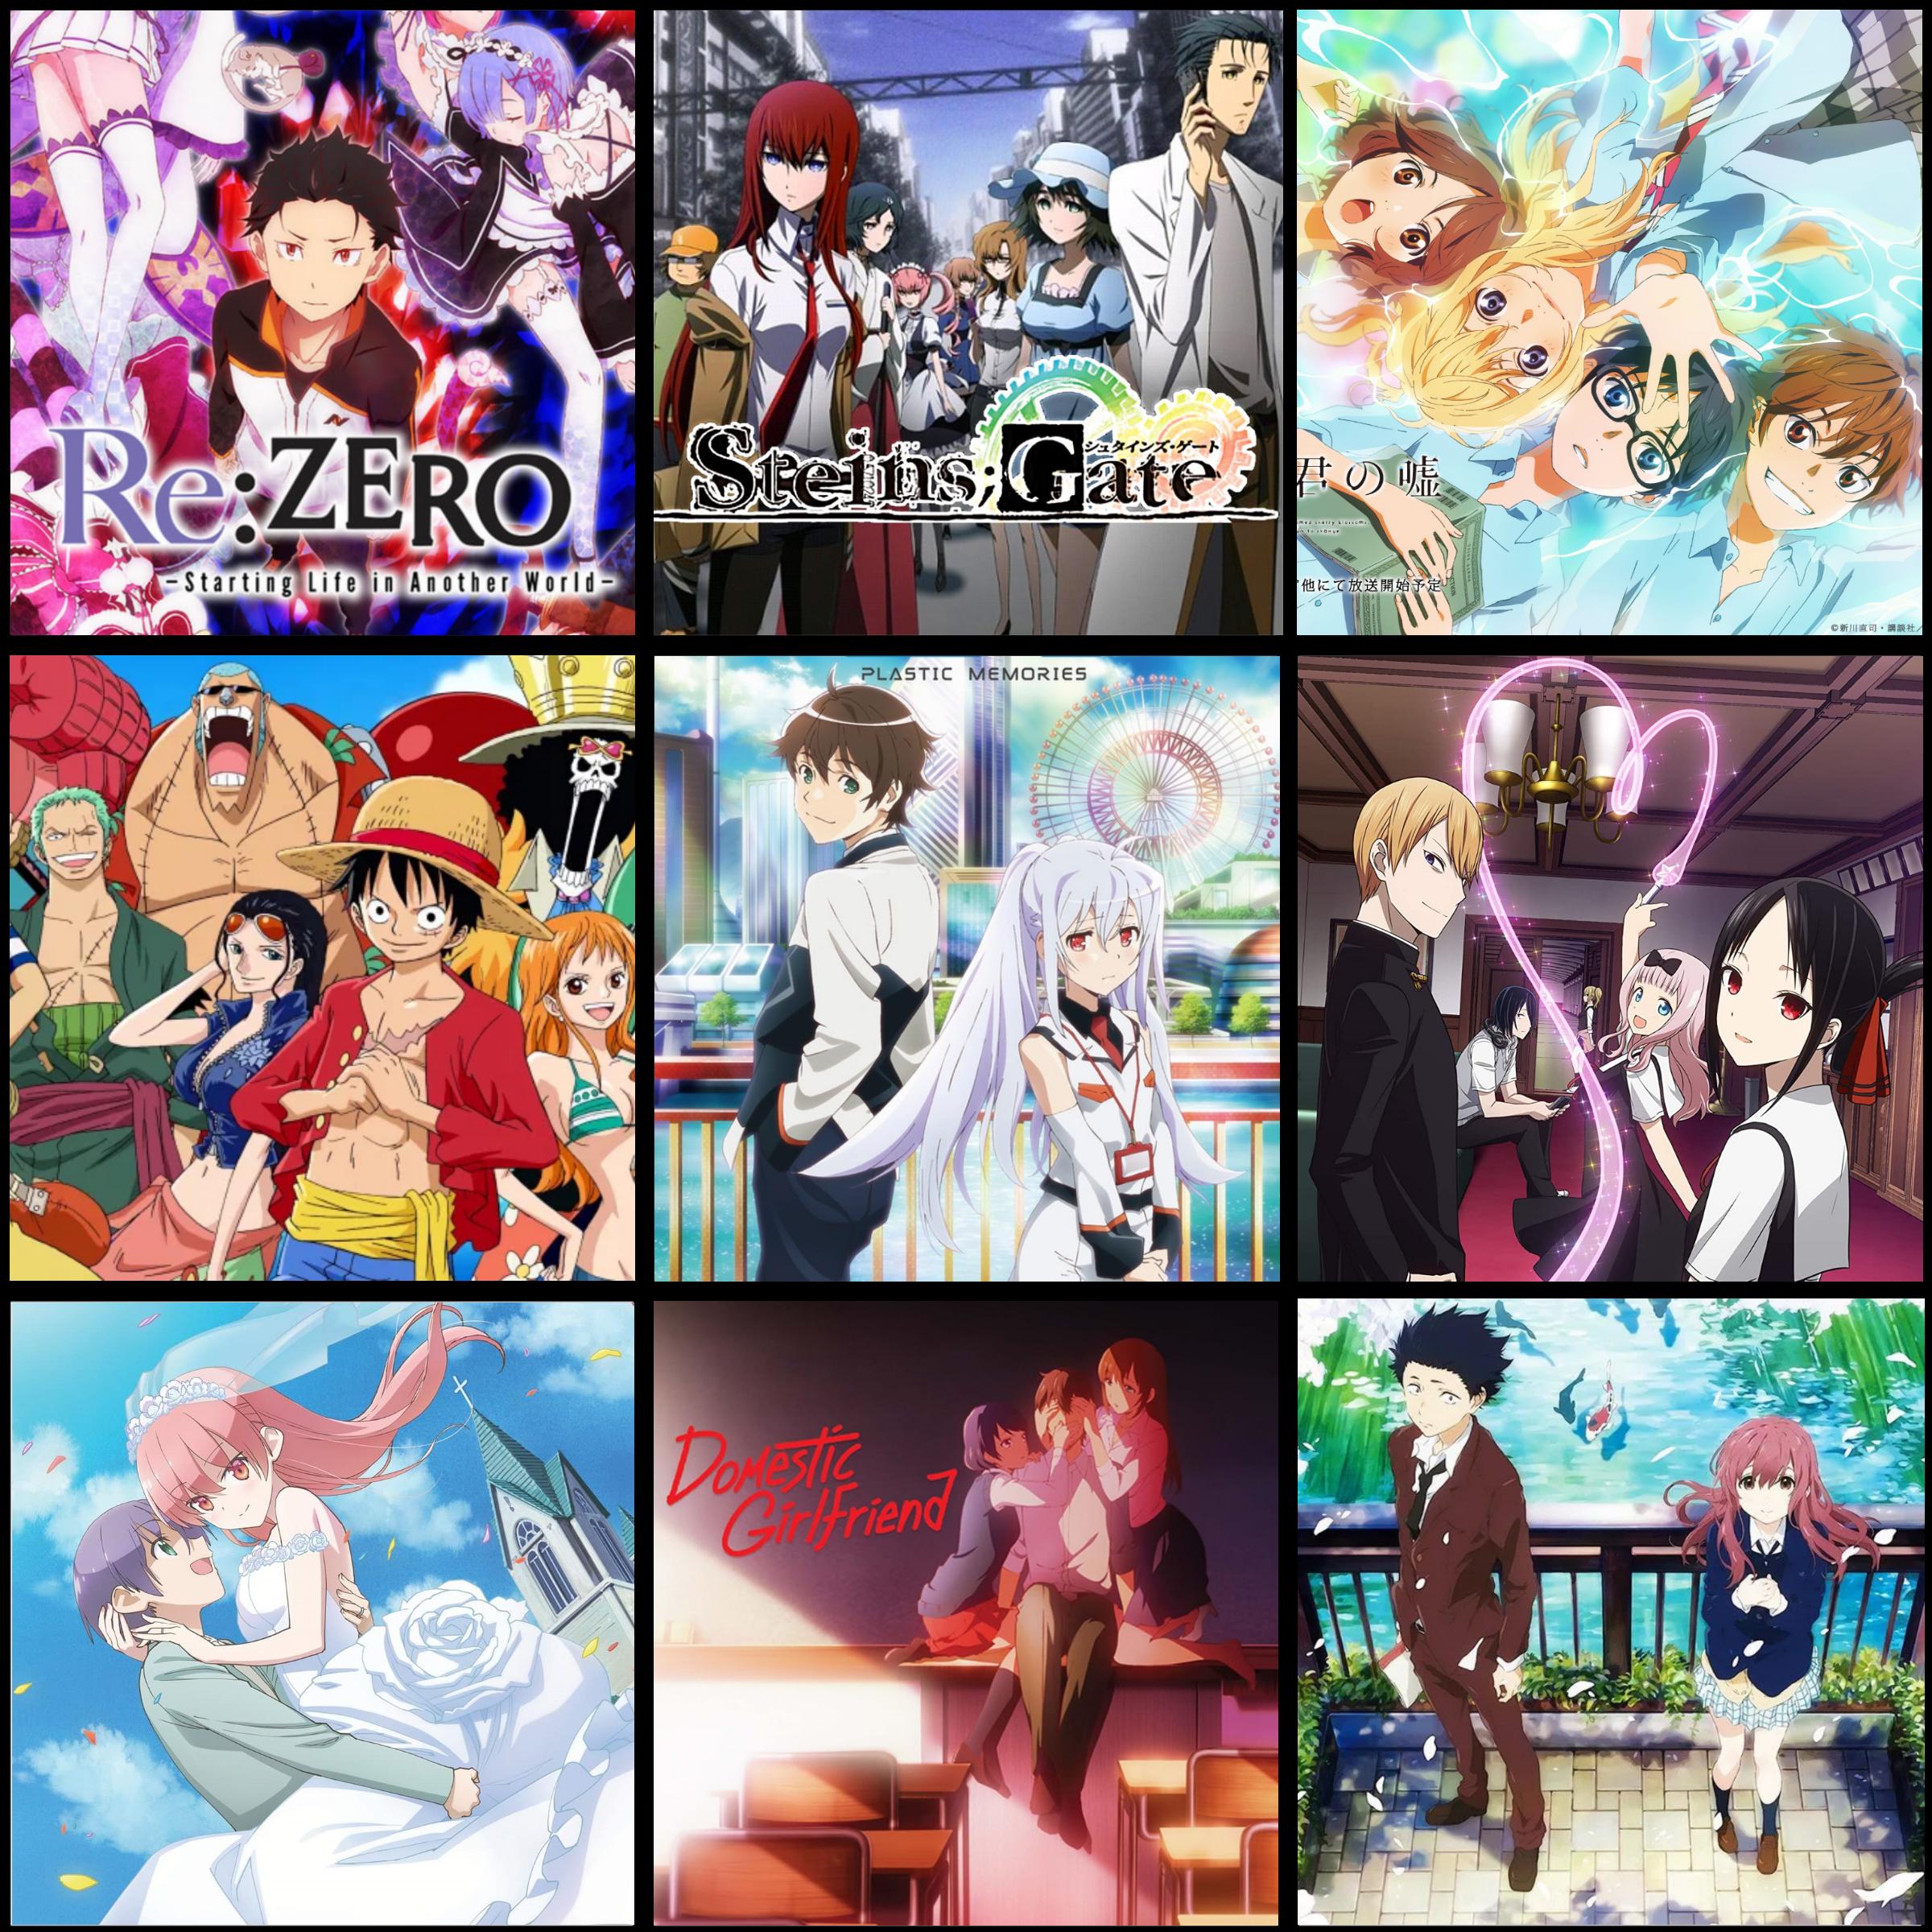 My Anime/Manga 3x3! Just started watching Anime this year so feel